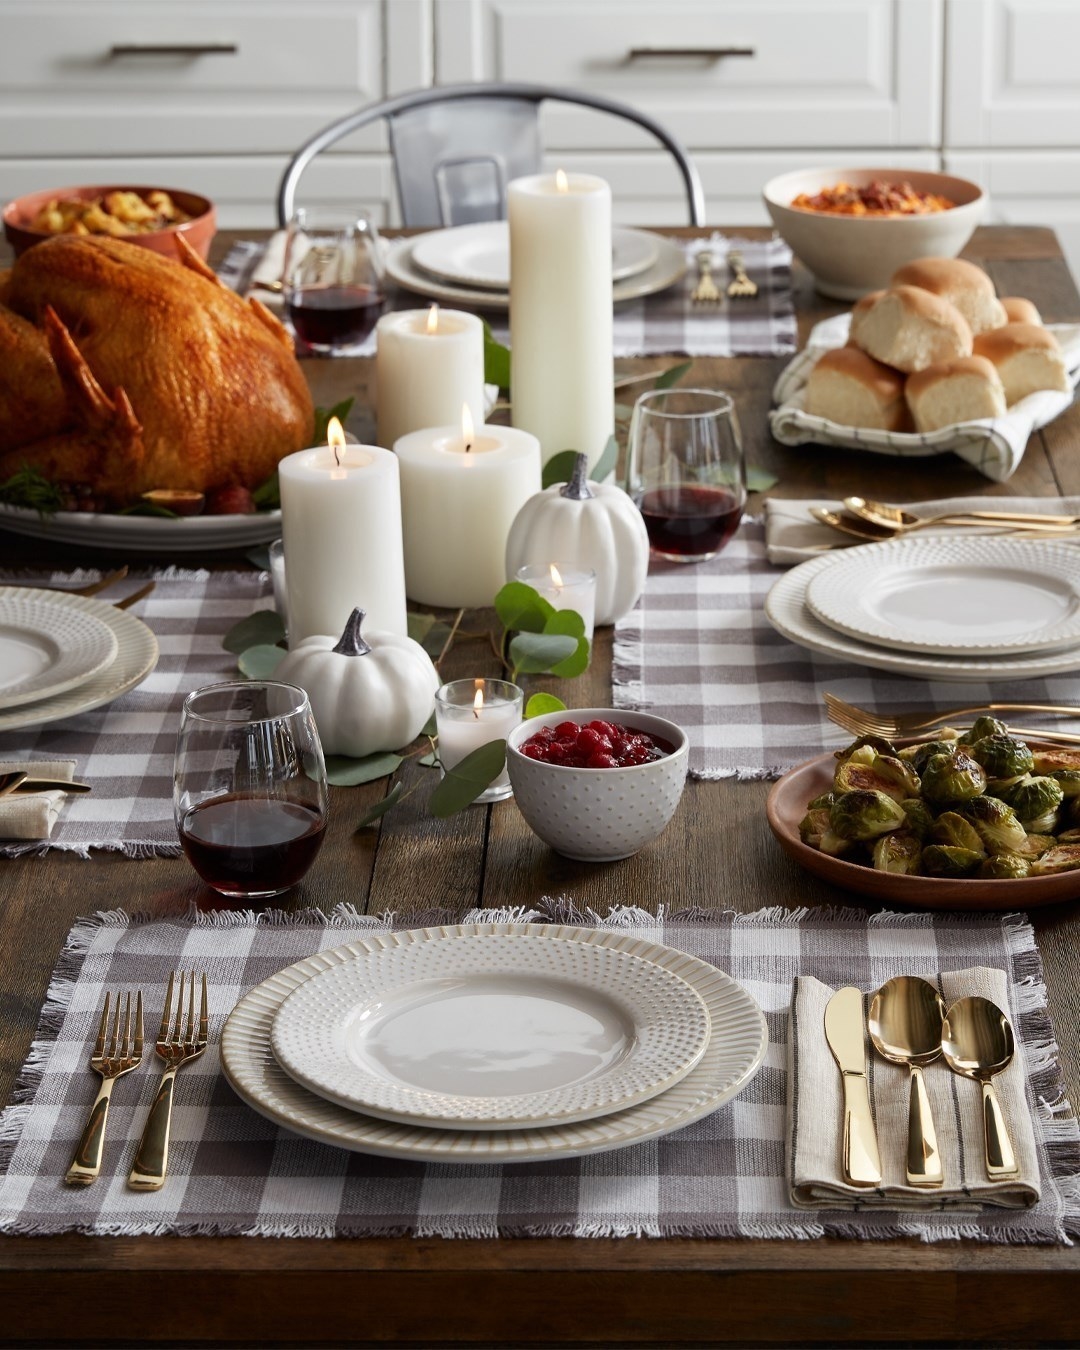 Holiday table set with food, cutlery, and placemats